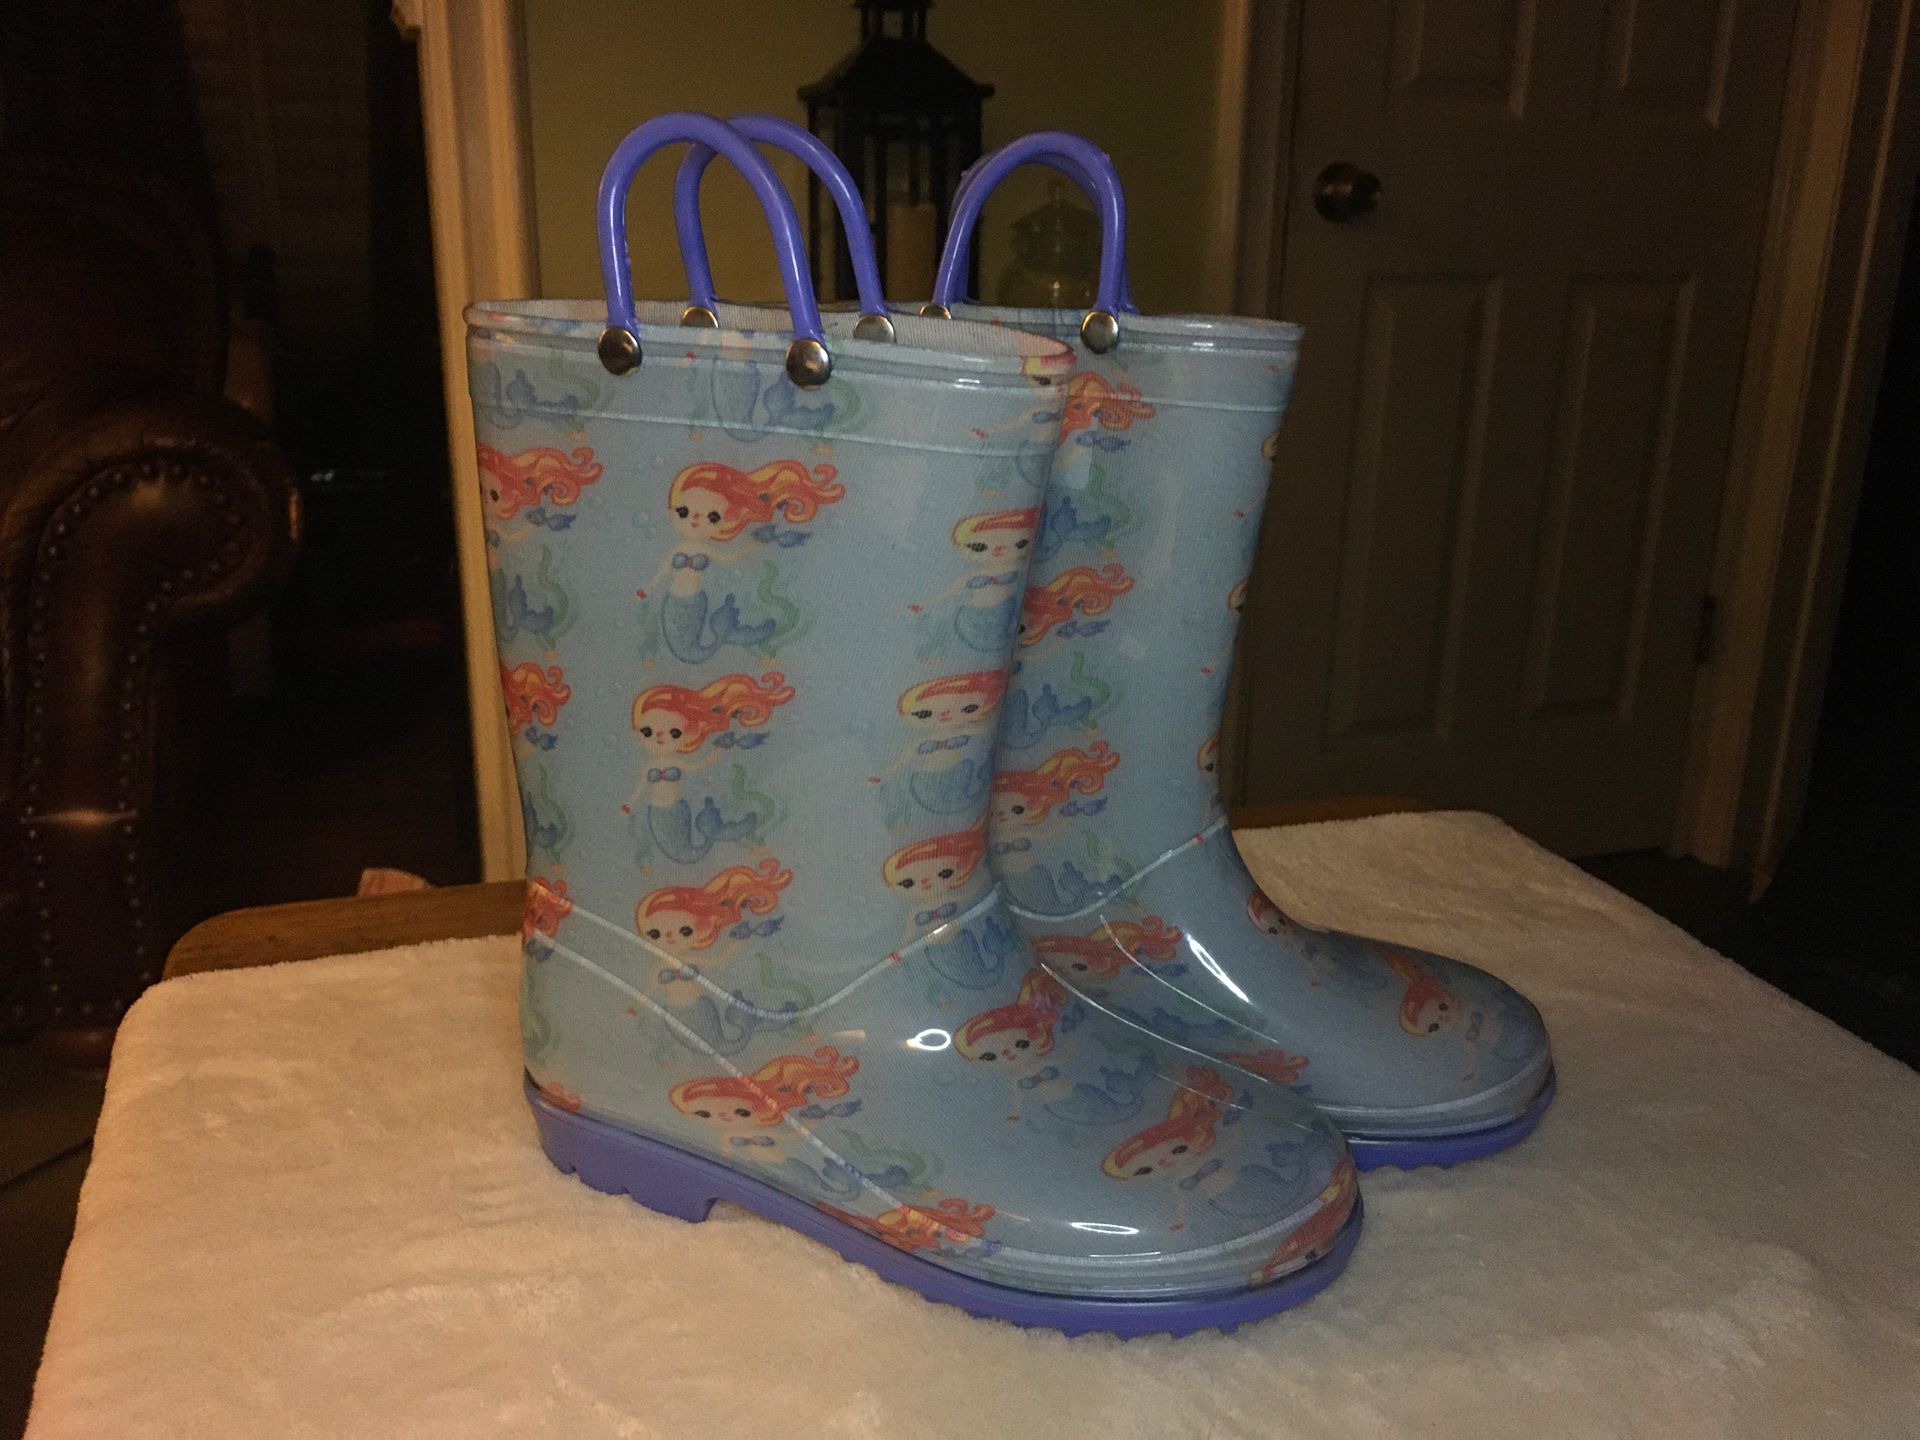 NEW GIRLS MERMAID RAIN BOOTS SIZES Y13 Y1 available in Inglewood 90301